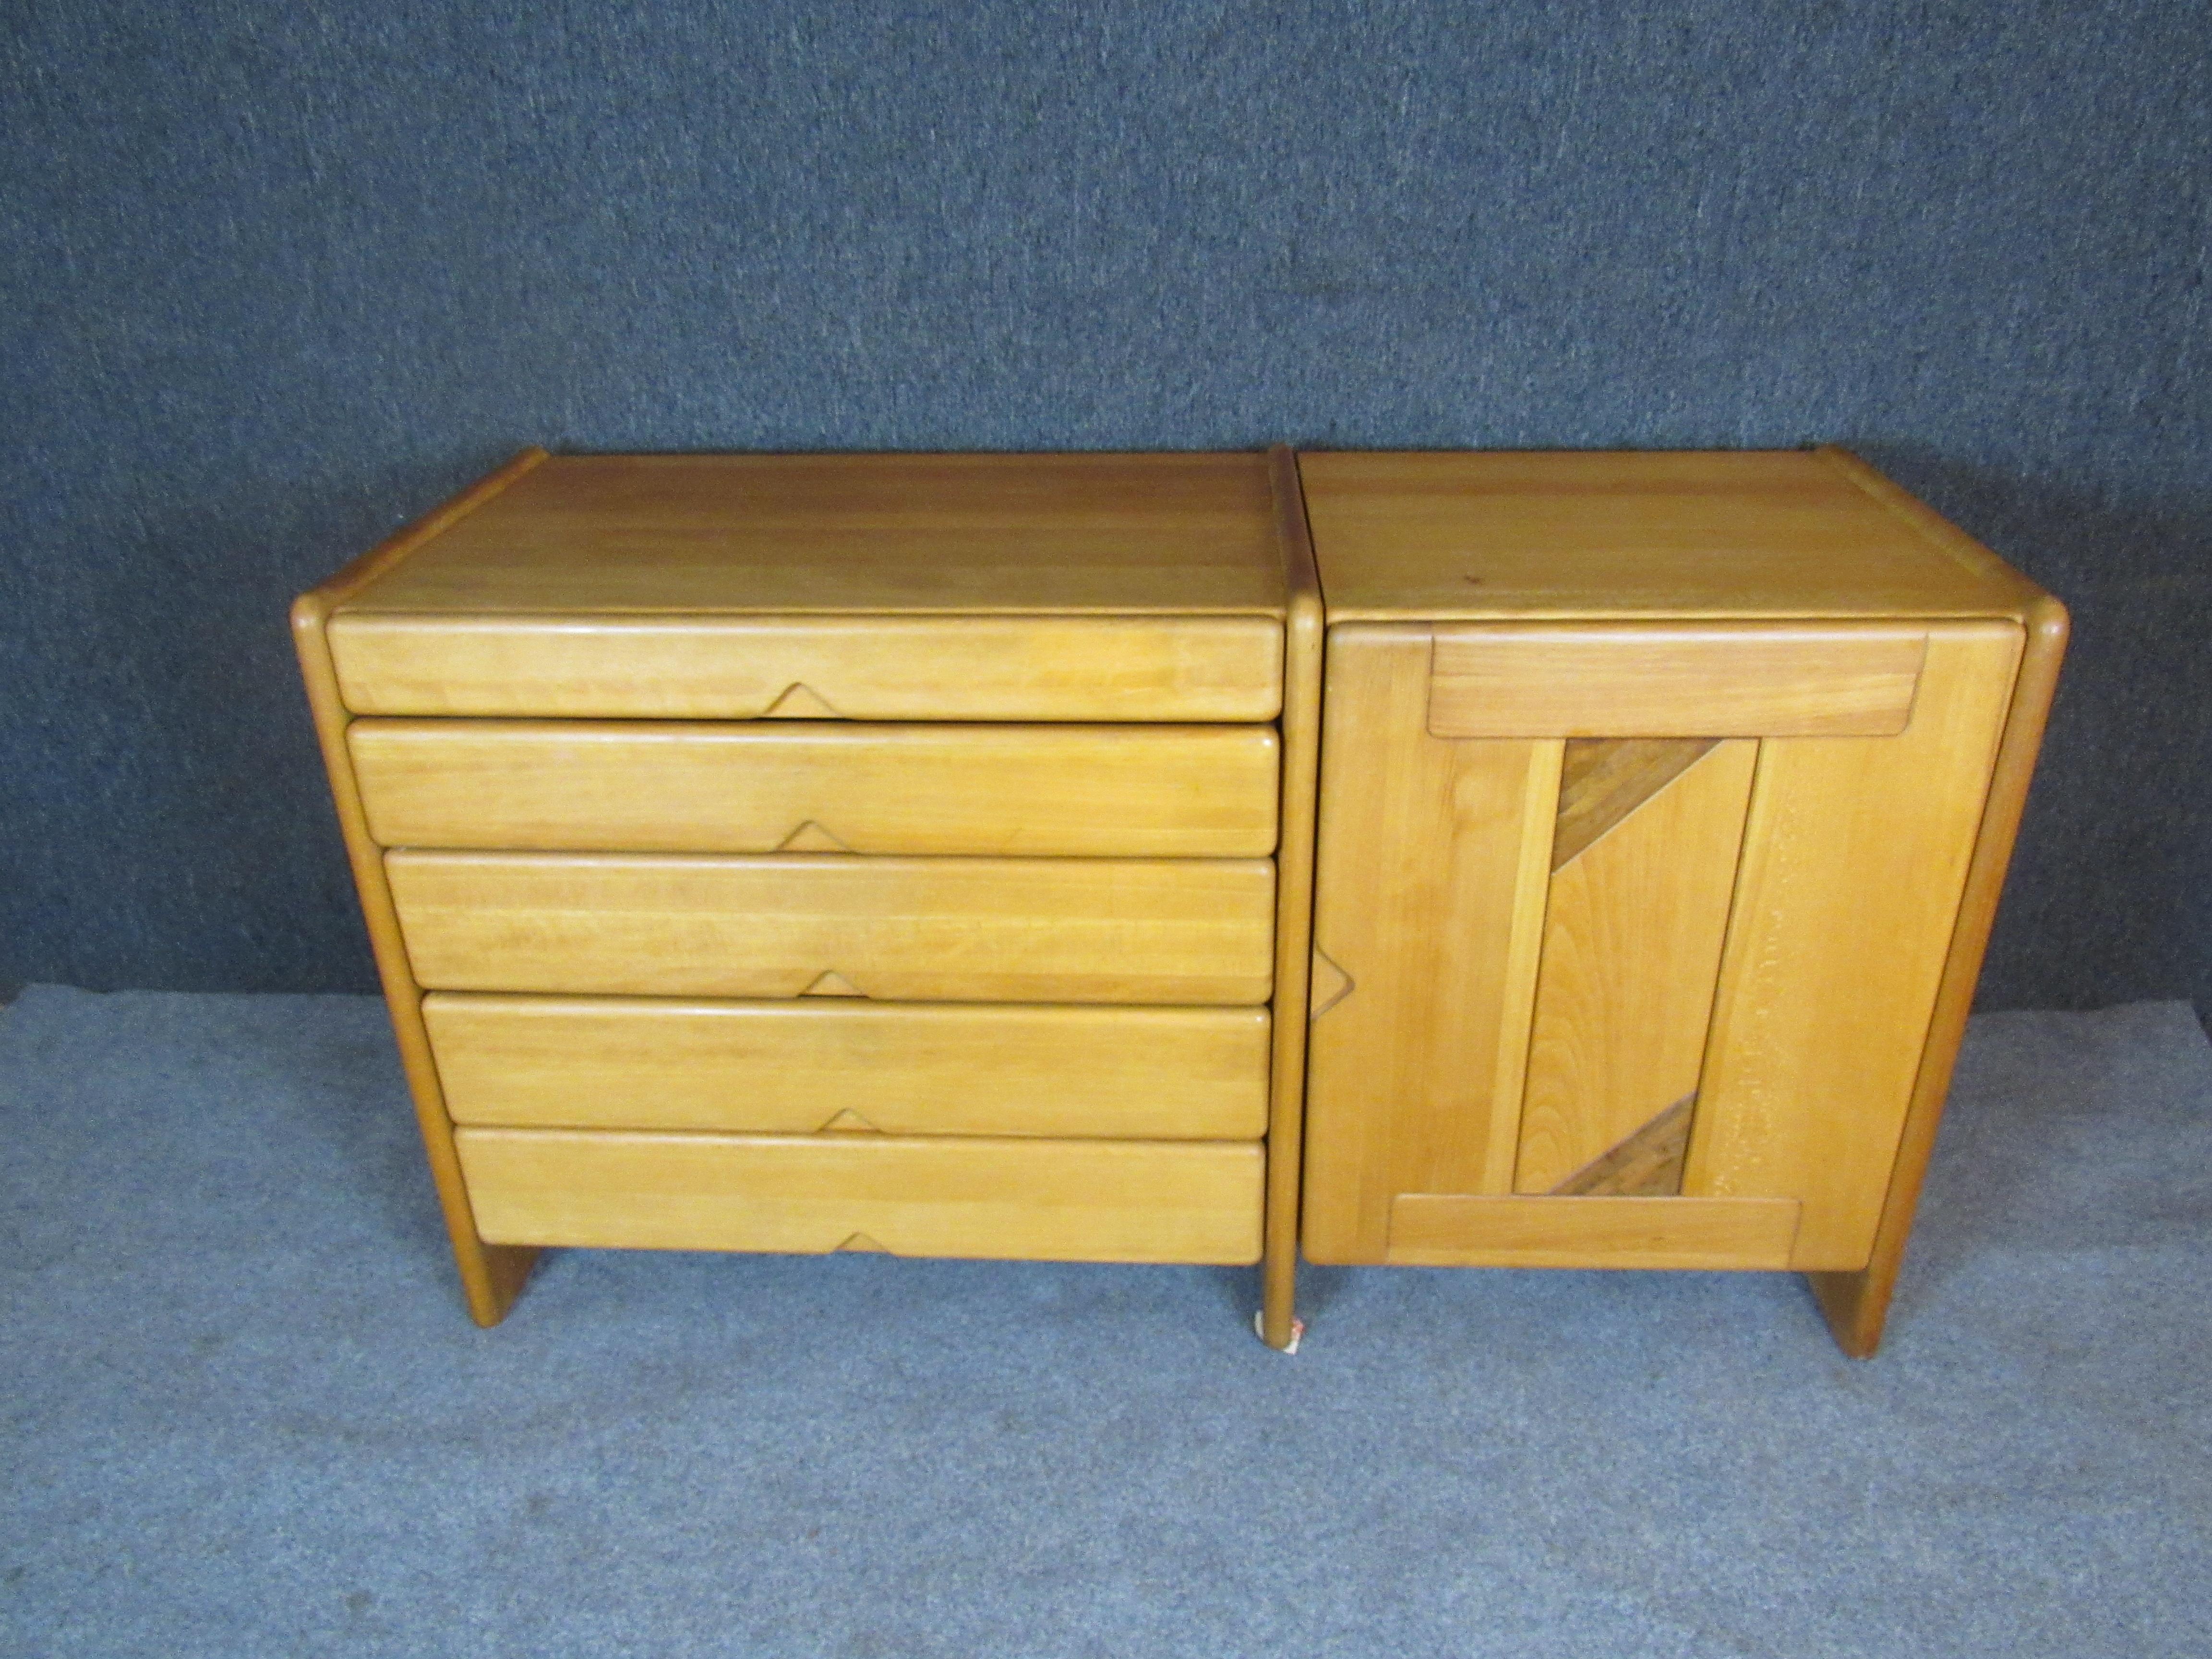 This piece designed by Soren Nissen and Ebbe Gehl for Seltz is a great modern form dresser. Faded hardwood frame with inlay dark wood design door. The dresser drawers have a triangle notch for handle use. The cabinet side is open and can accommodate